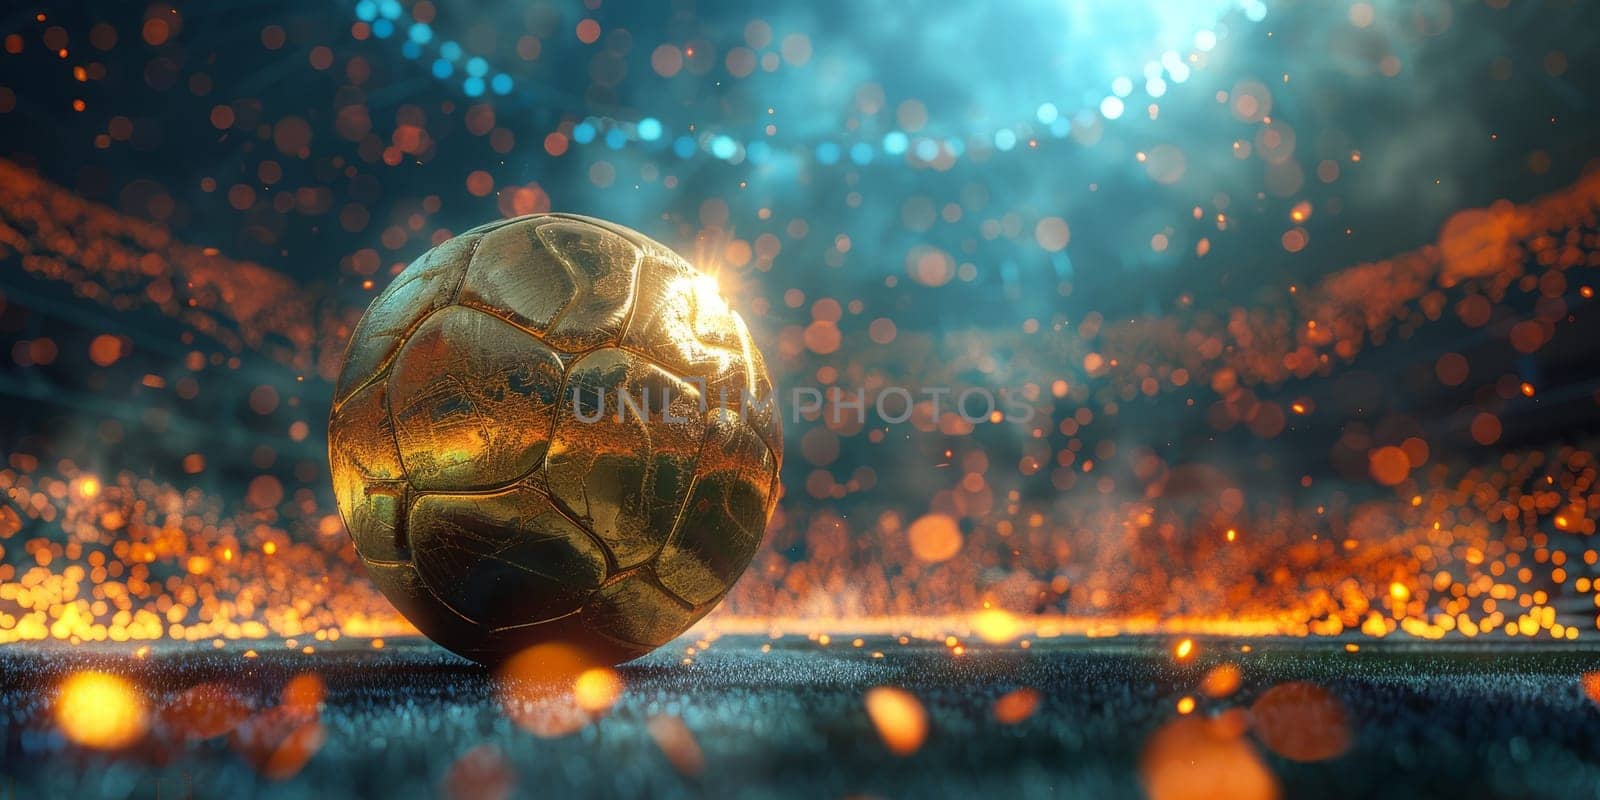 A gold soccer ball sits on a field. The ball is surrounded by grass and the field is lit up